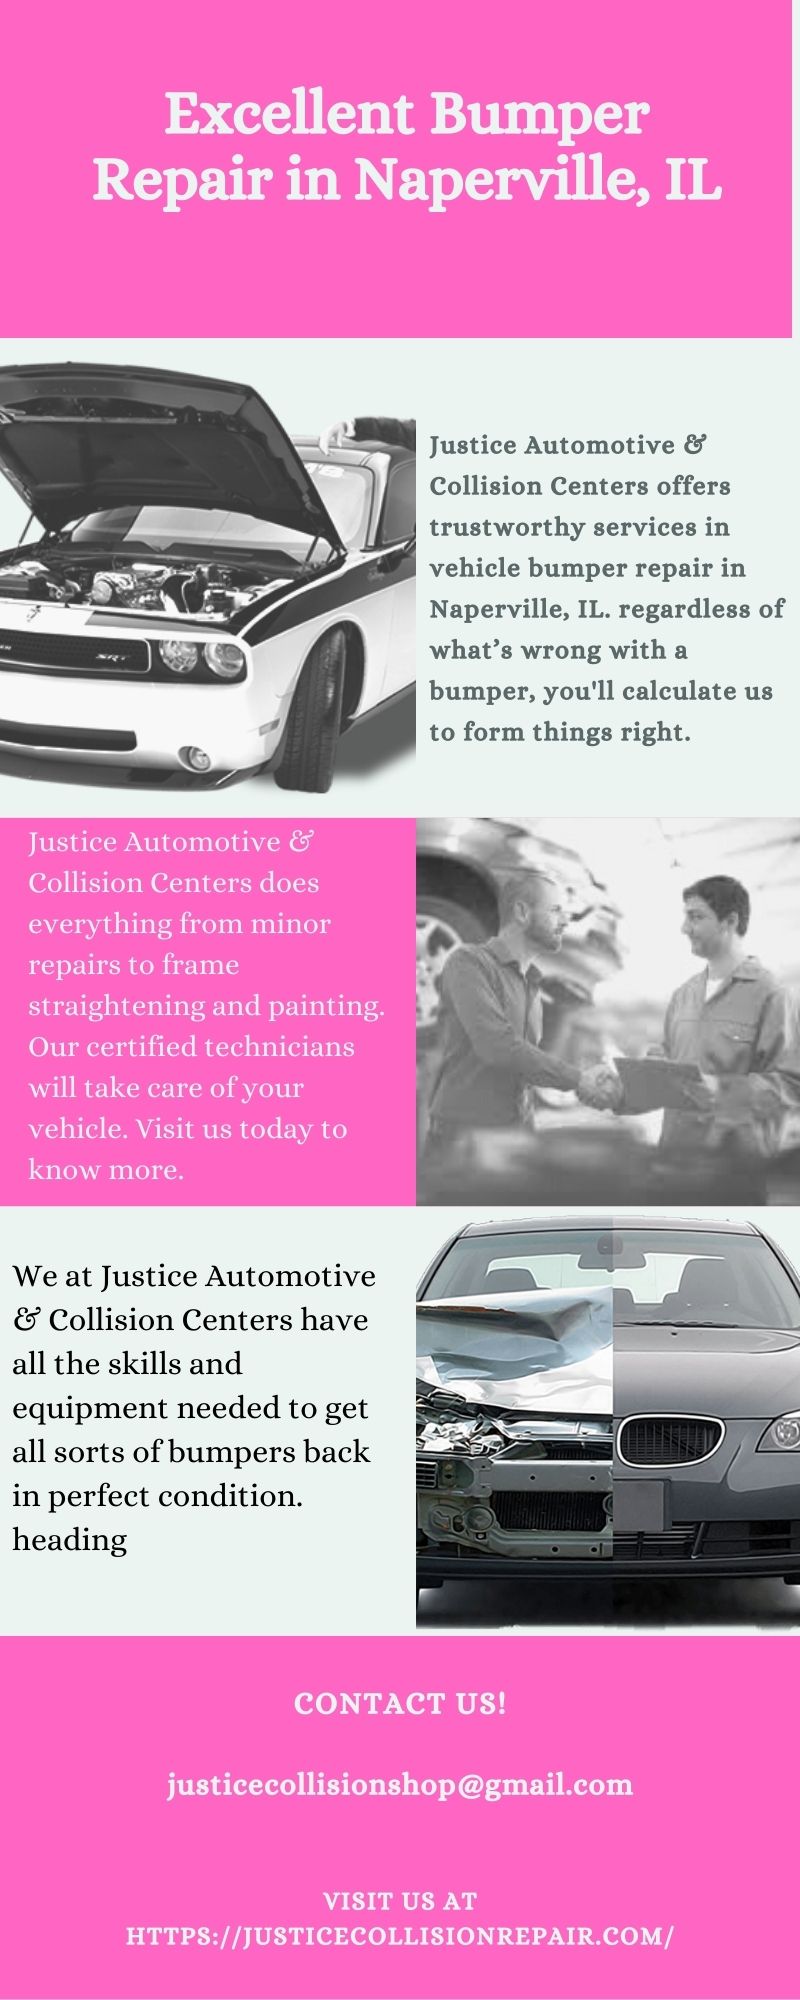 Get the Best Excellent Bumper Repair in Naperville, IL » Justice Automotive's Timeline Photos » Dailygram ... The Business Network